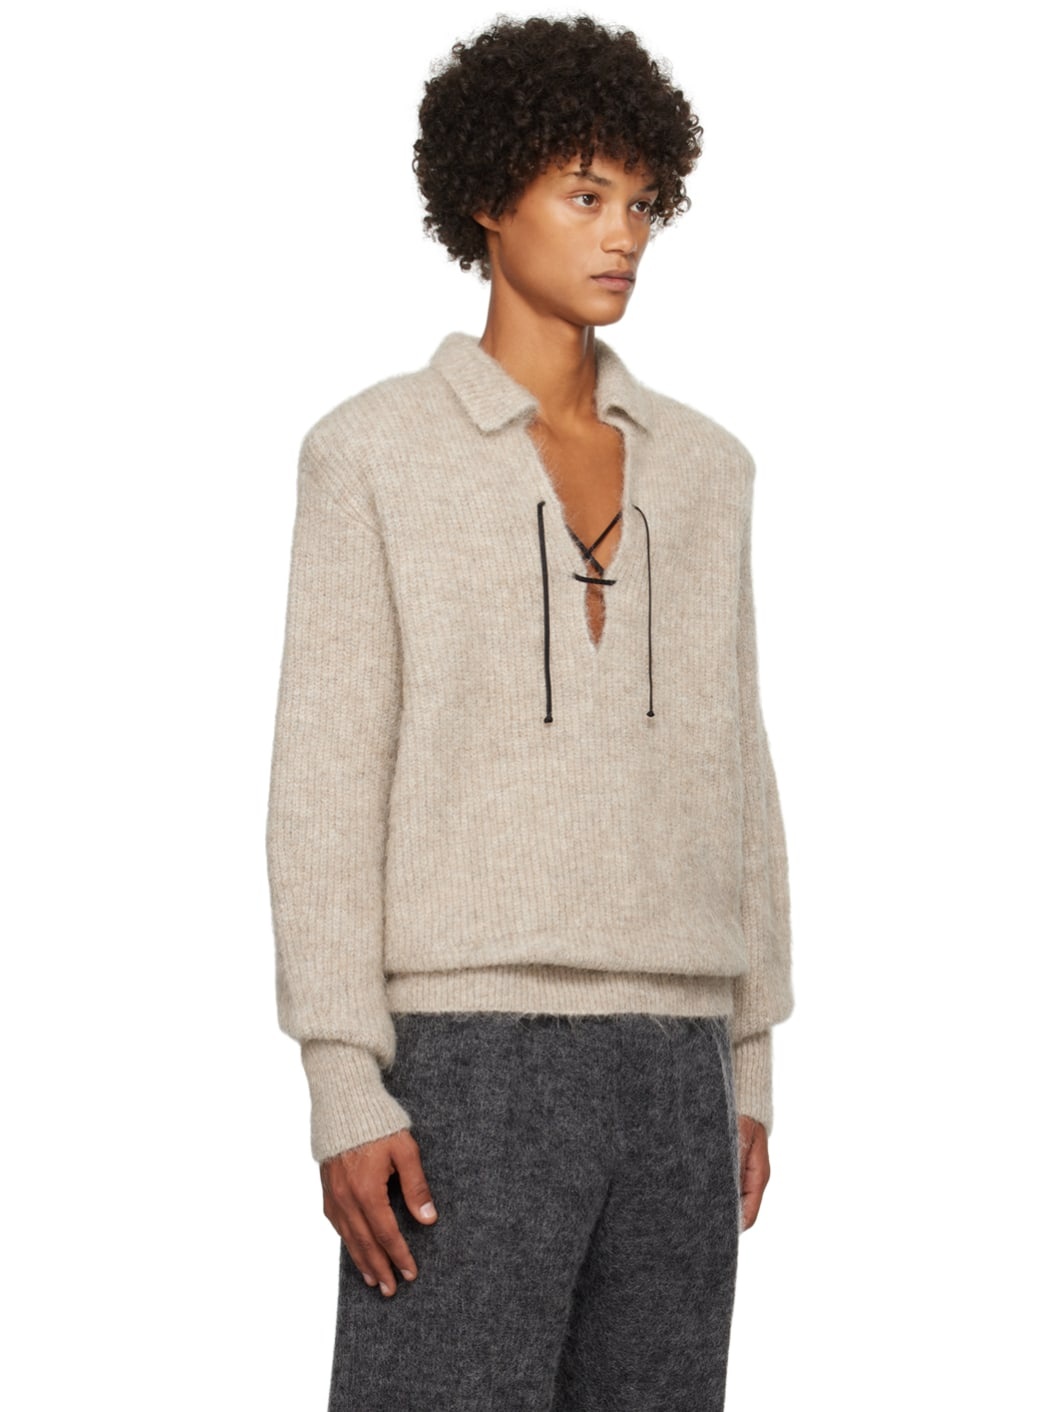 SSENSE Exclusive Taupe Harth Sweater - 2